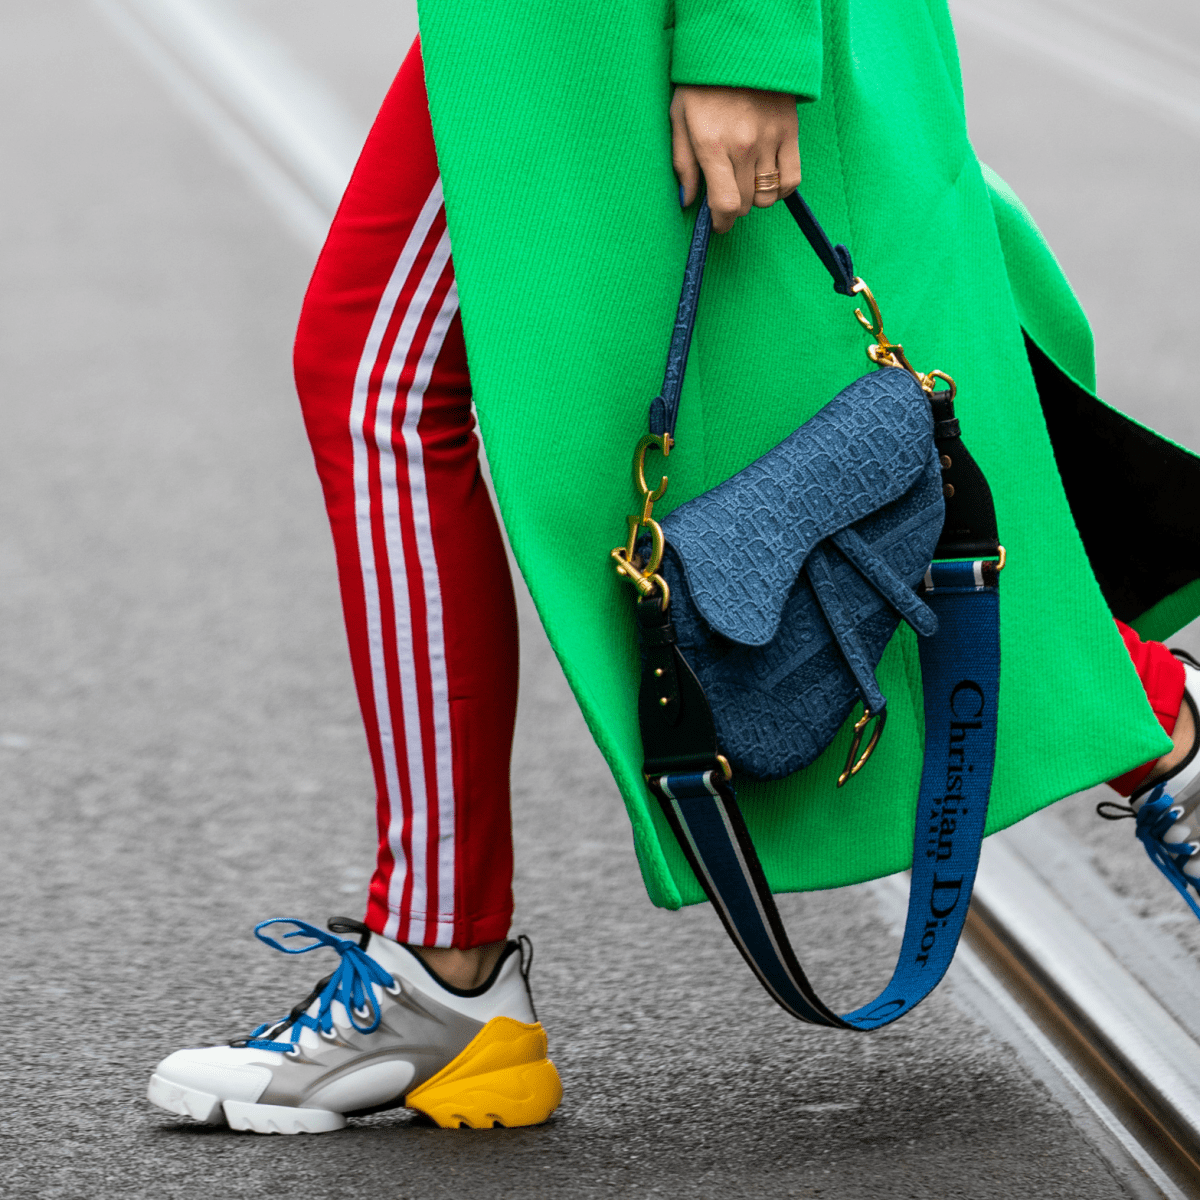 Athleisure: What Exactly Is This New Fashion Trend and Why Is it So Popular